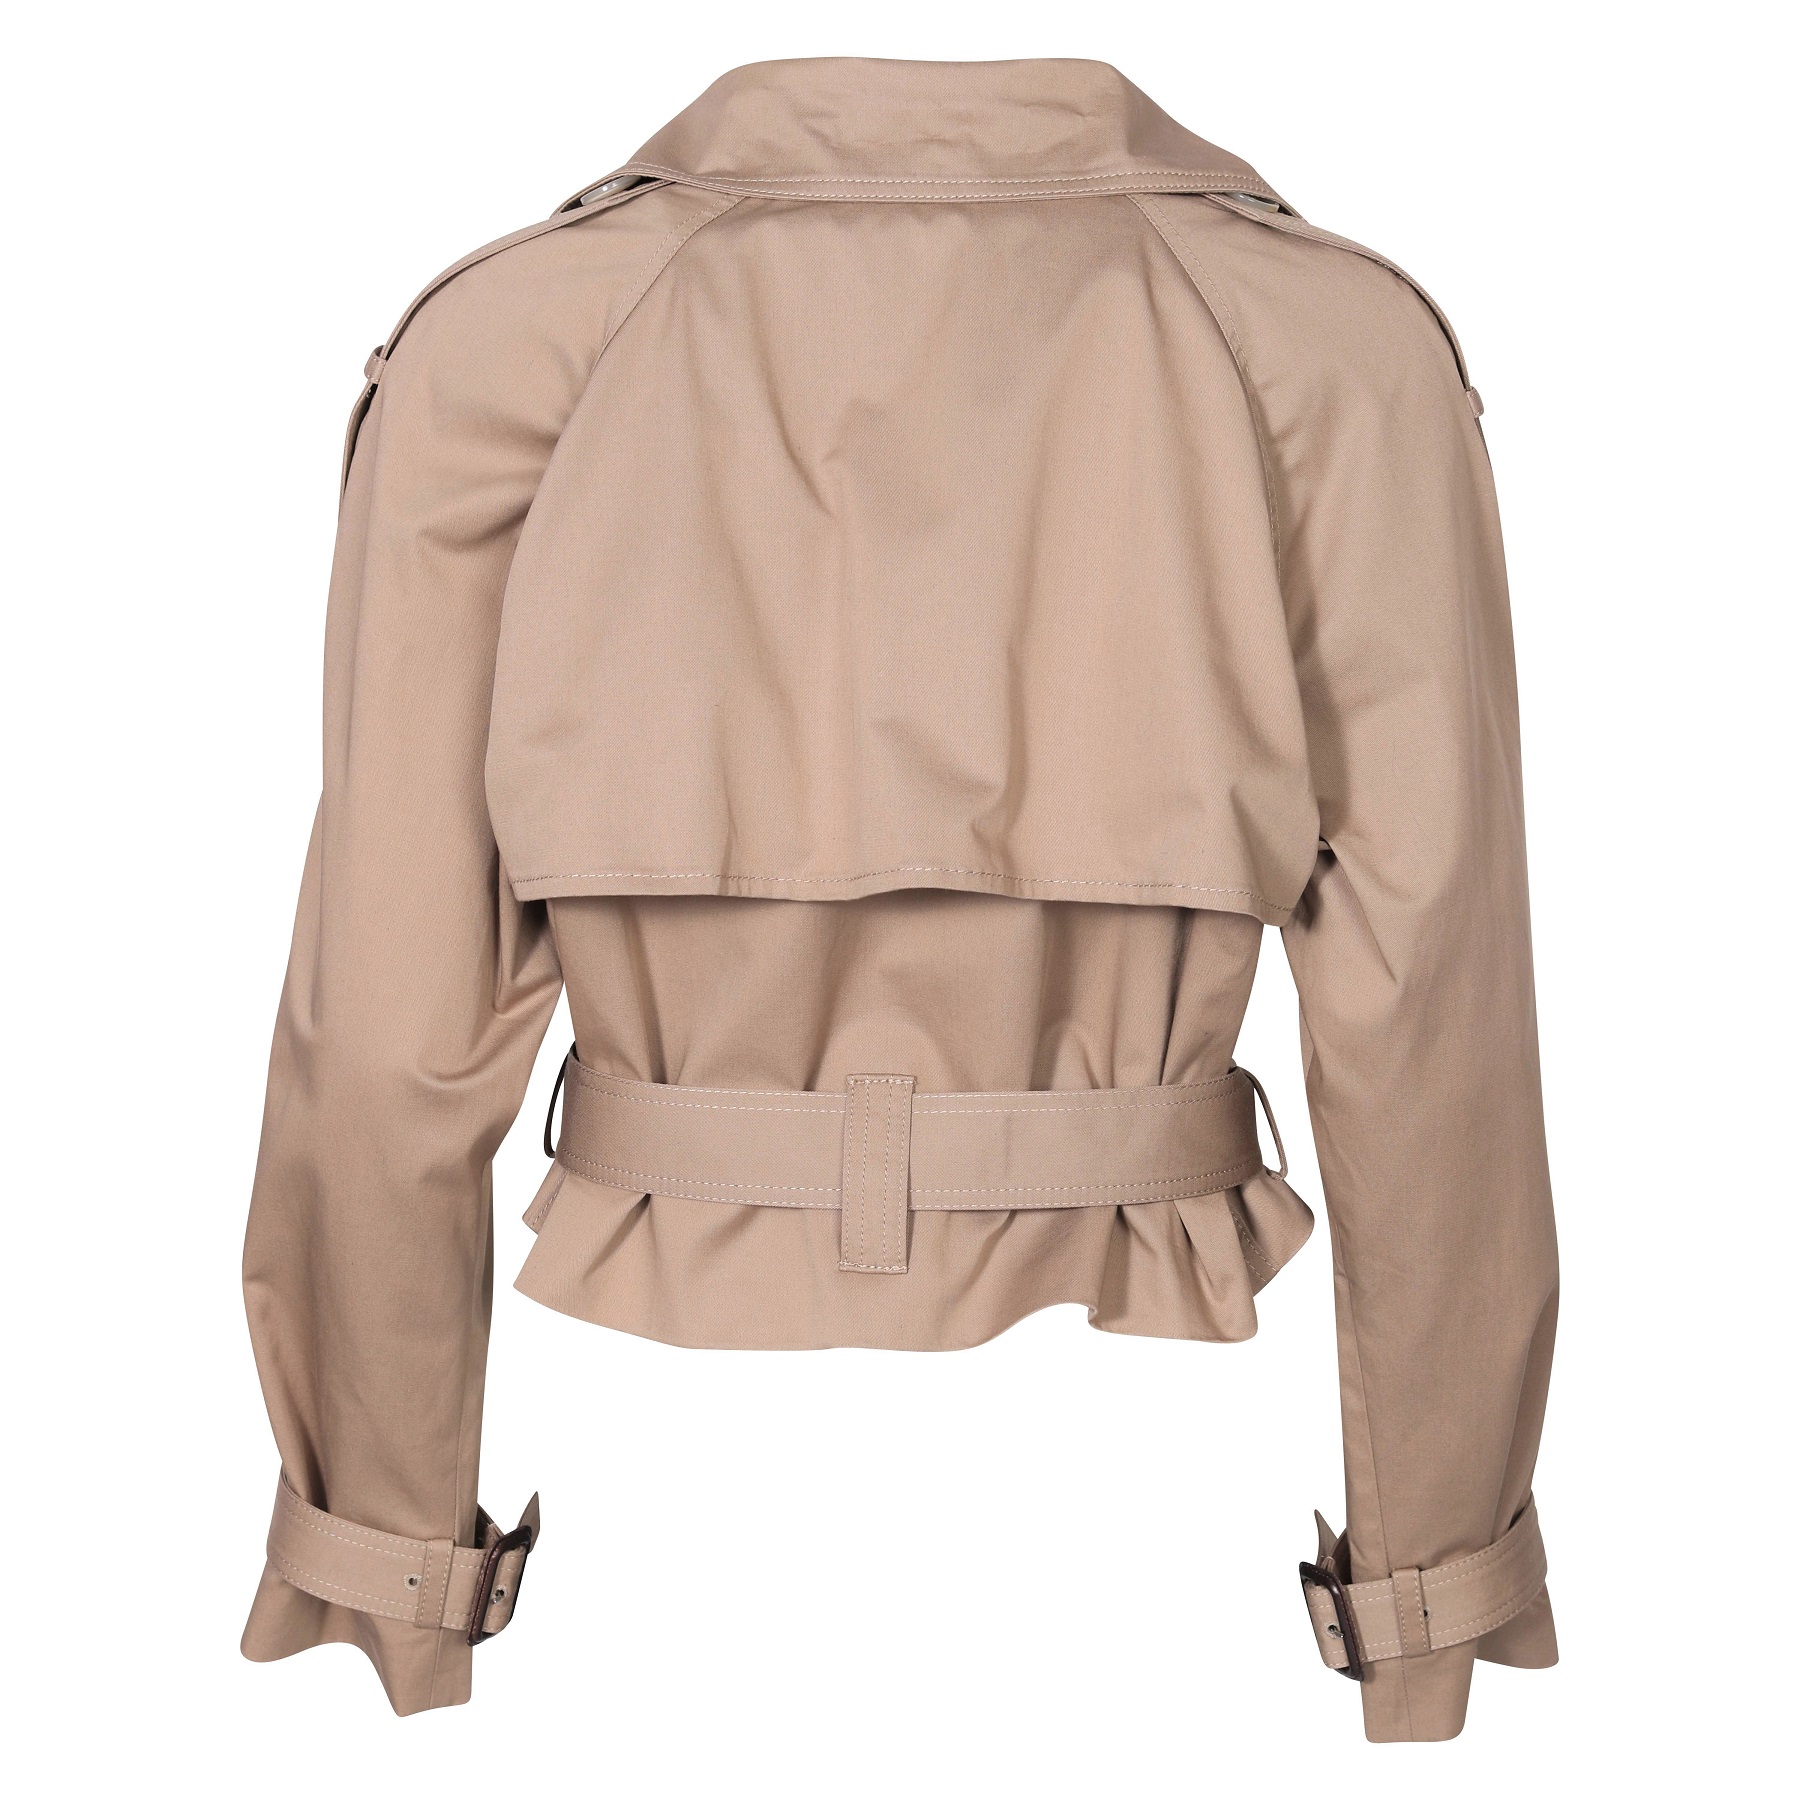 ACNE STUDIOS Cropped Trench Coat in Cold Beige 34